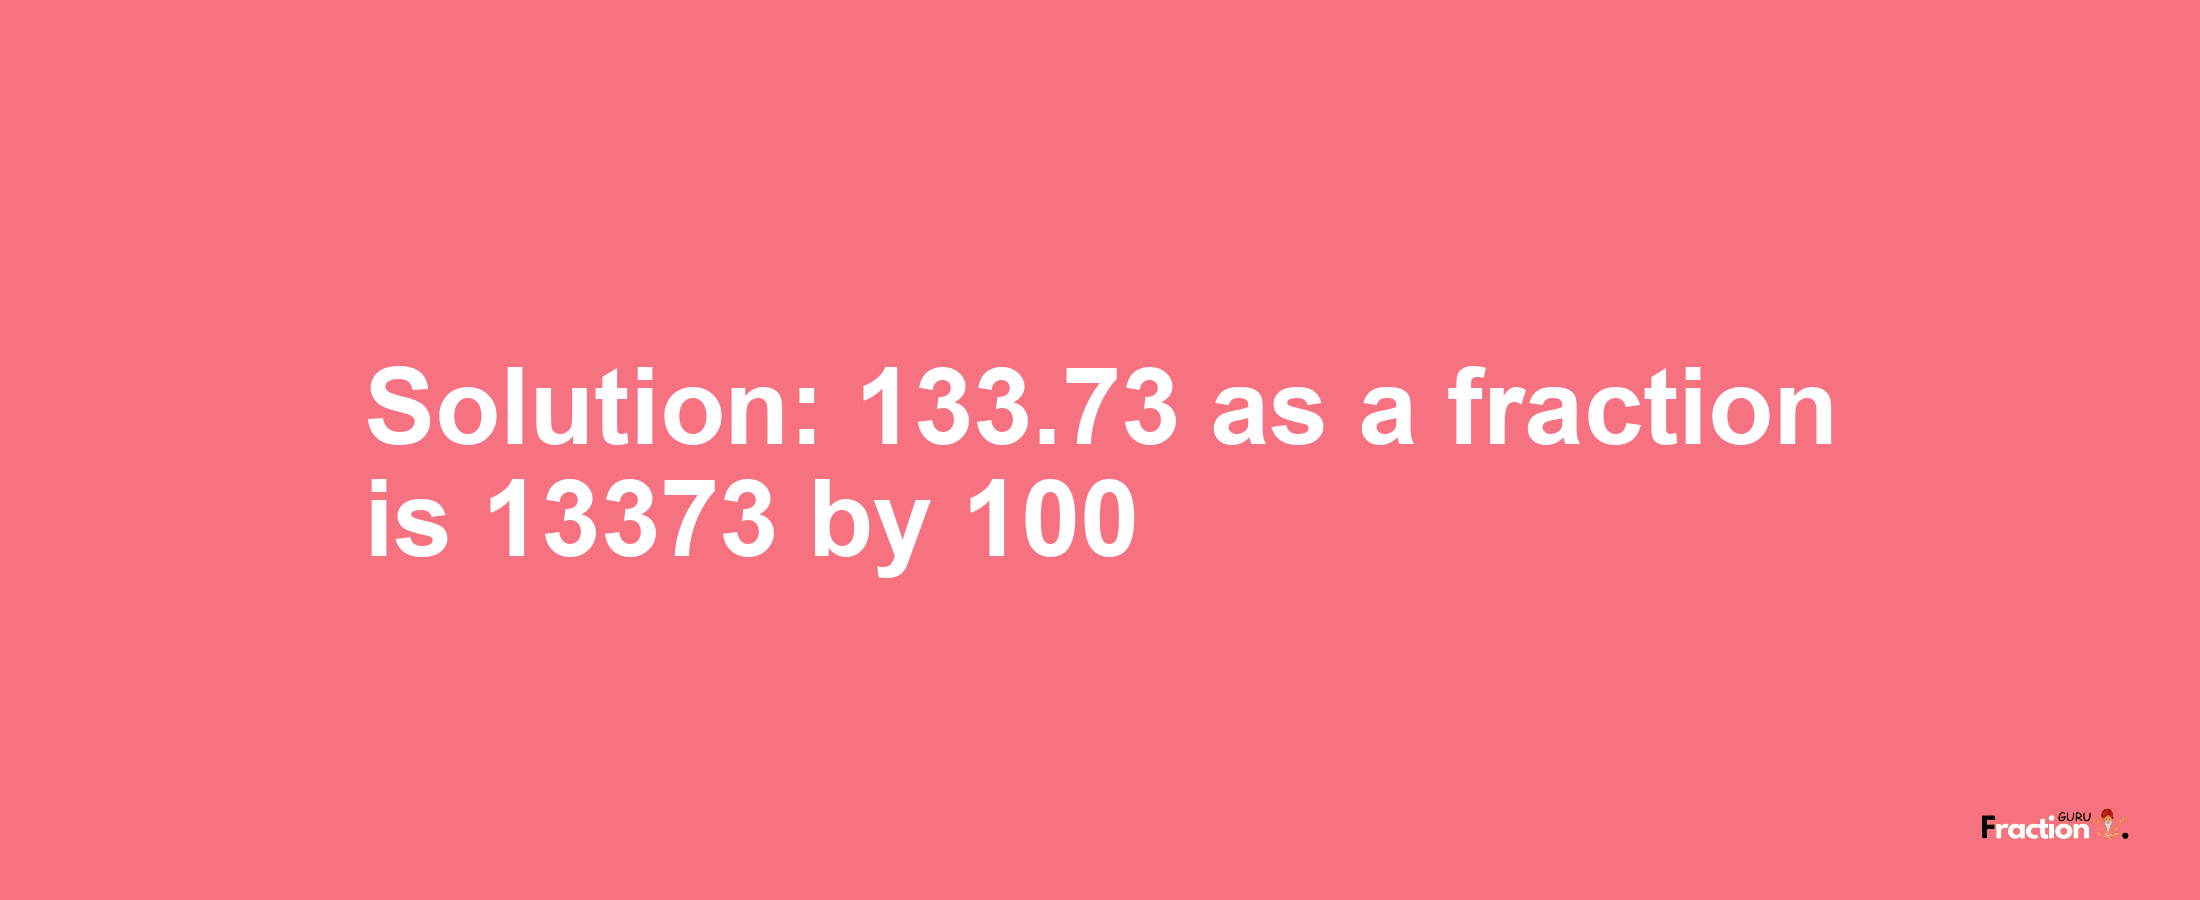 Solution:133.73 as a fraction is 13373/100